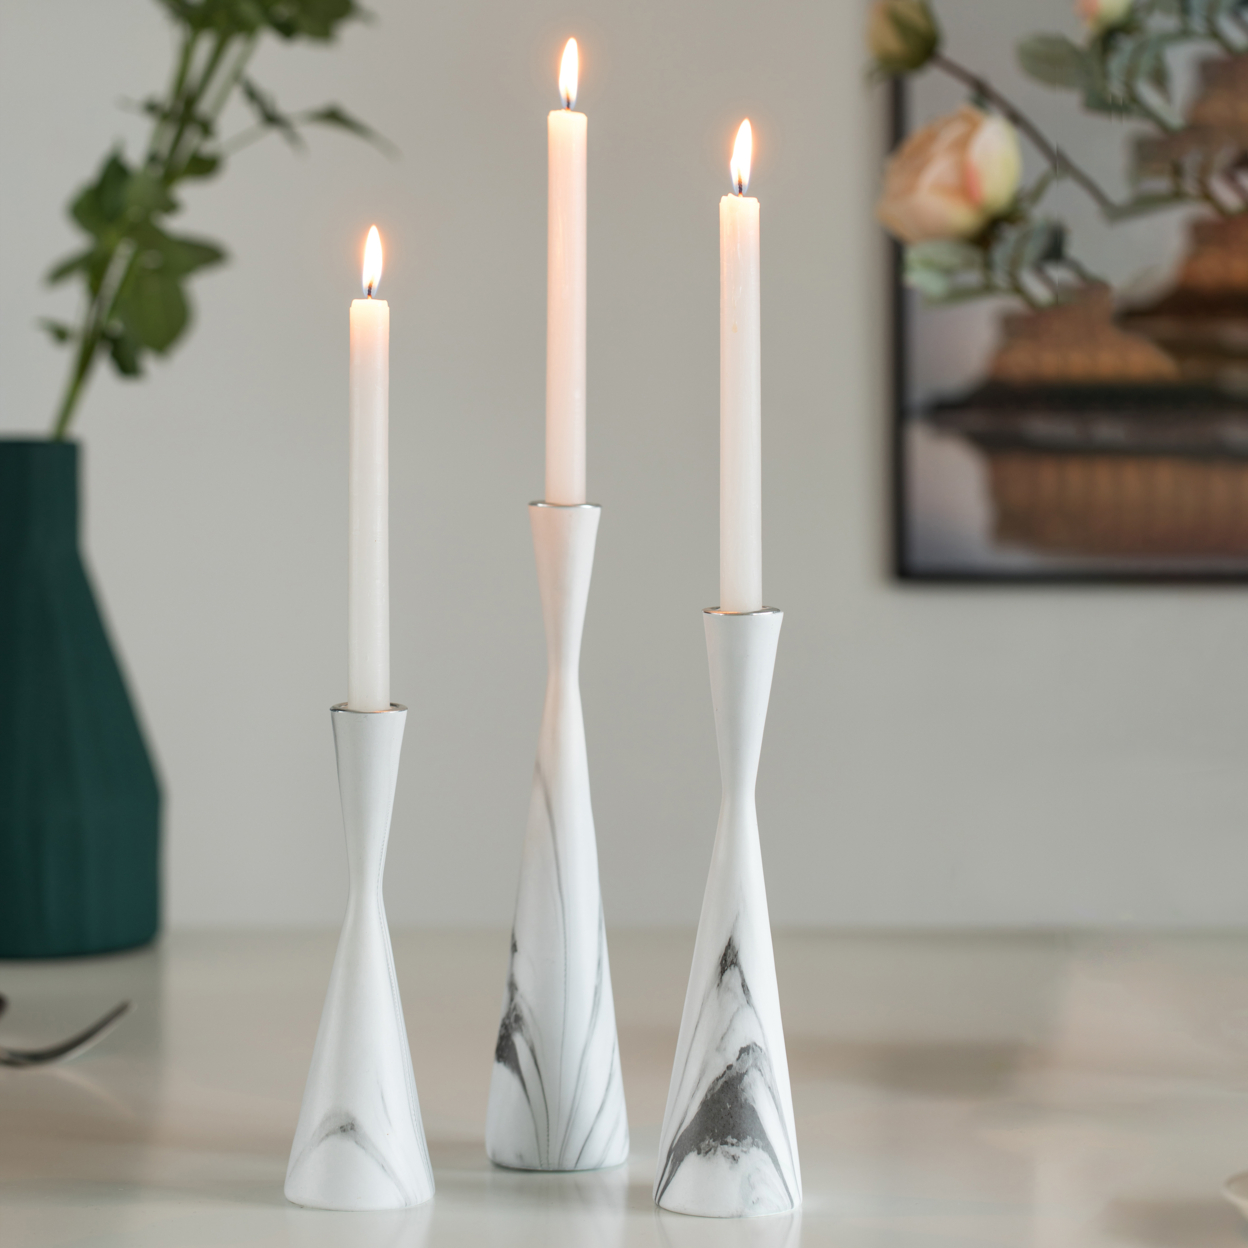 Set Of 3 Decorative Resin Taper Candle Holders, Marble Design Modern Candlesticks - White